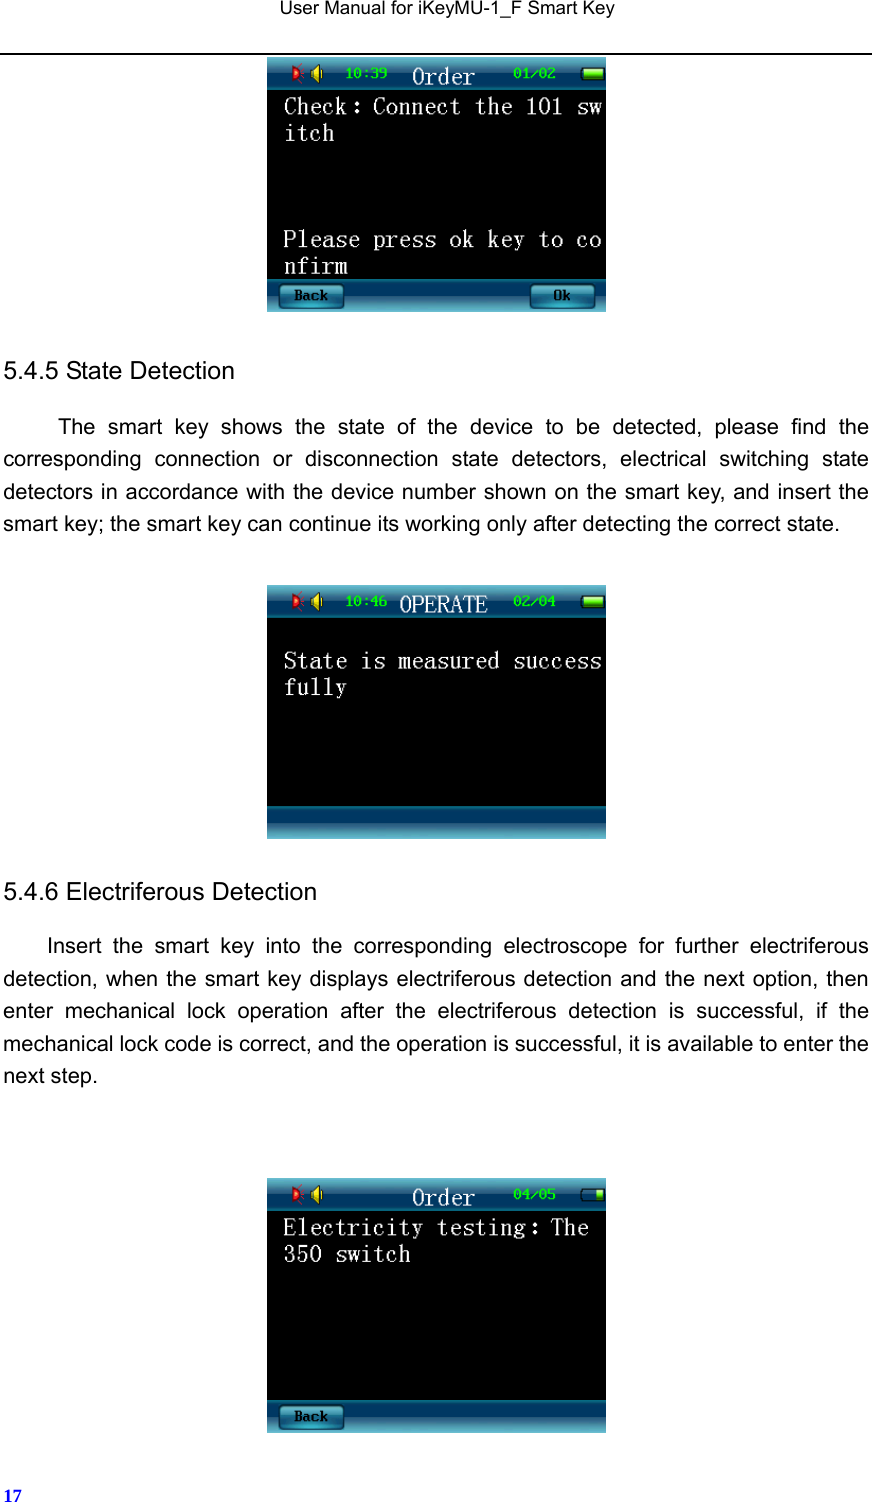   User Manual for iKeyMU-1_F Smart Key       17 5.4.5 State Detection The smart key shows the state of the device to be detected, please find the corresponding connection or disconnection state detectors, electrical switching state detectors in accordance with the device number shown on the smart key, and insert the smart key; the smart key can continue its working only after detecting the correct state.       5.4.6 Electriferous Detection Insert the smart key into the corresponding electroscope for further electriferous detection, when the smart key displays electriferous detection and the next option, then enter mechanical lock operation after the electriferous detection is successful, if the mechanical lock code is correct, and the operation is successful, it is available to enter the next step.    